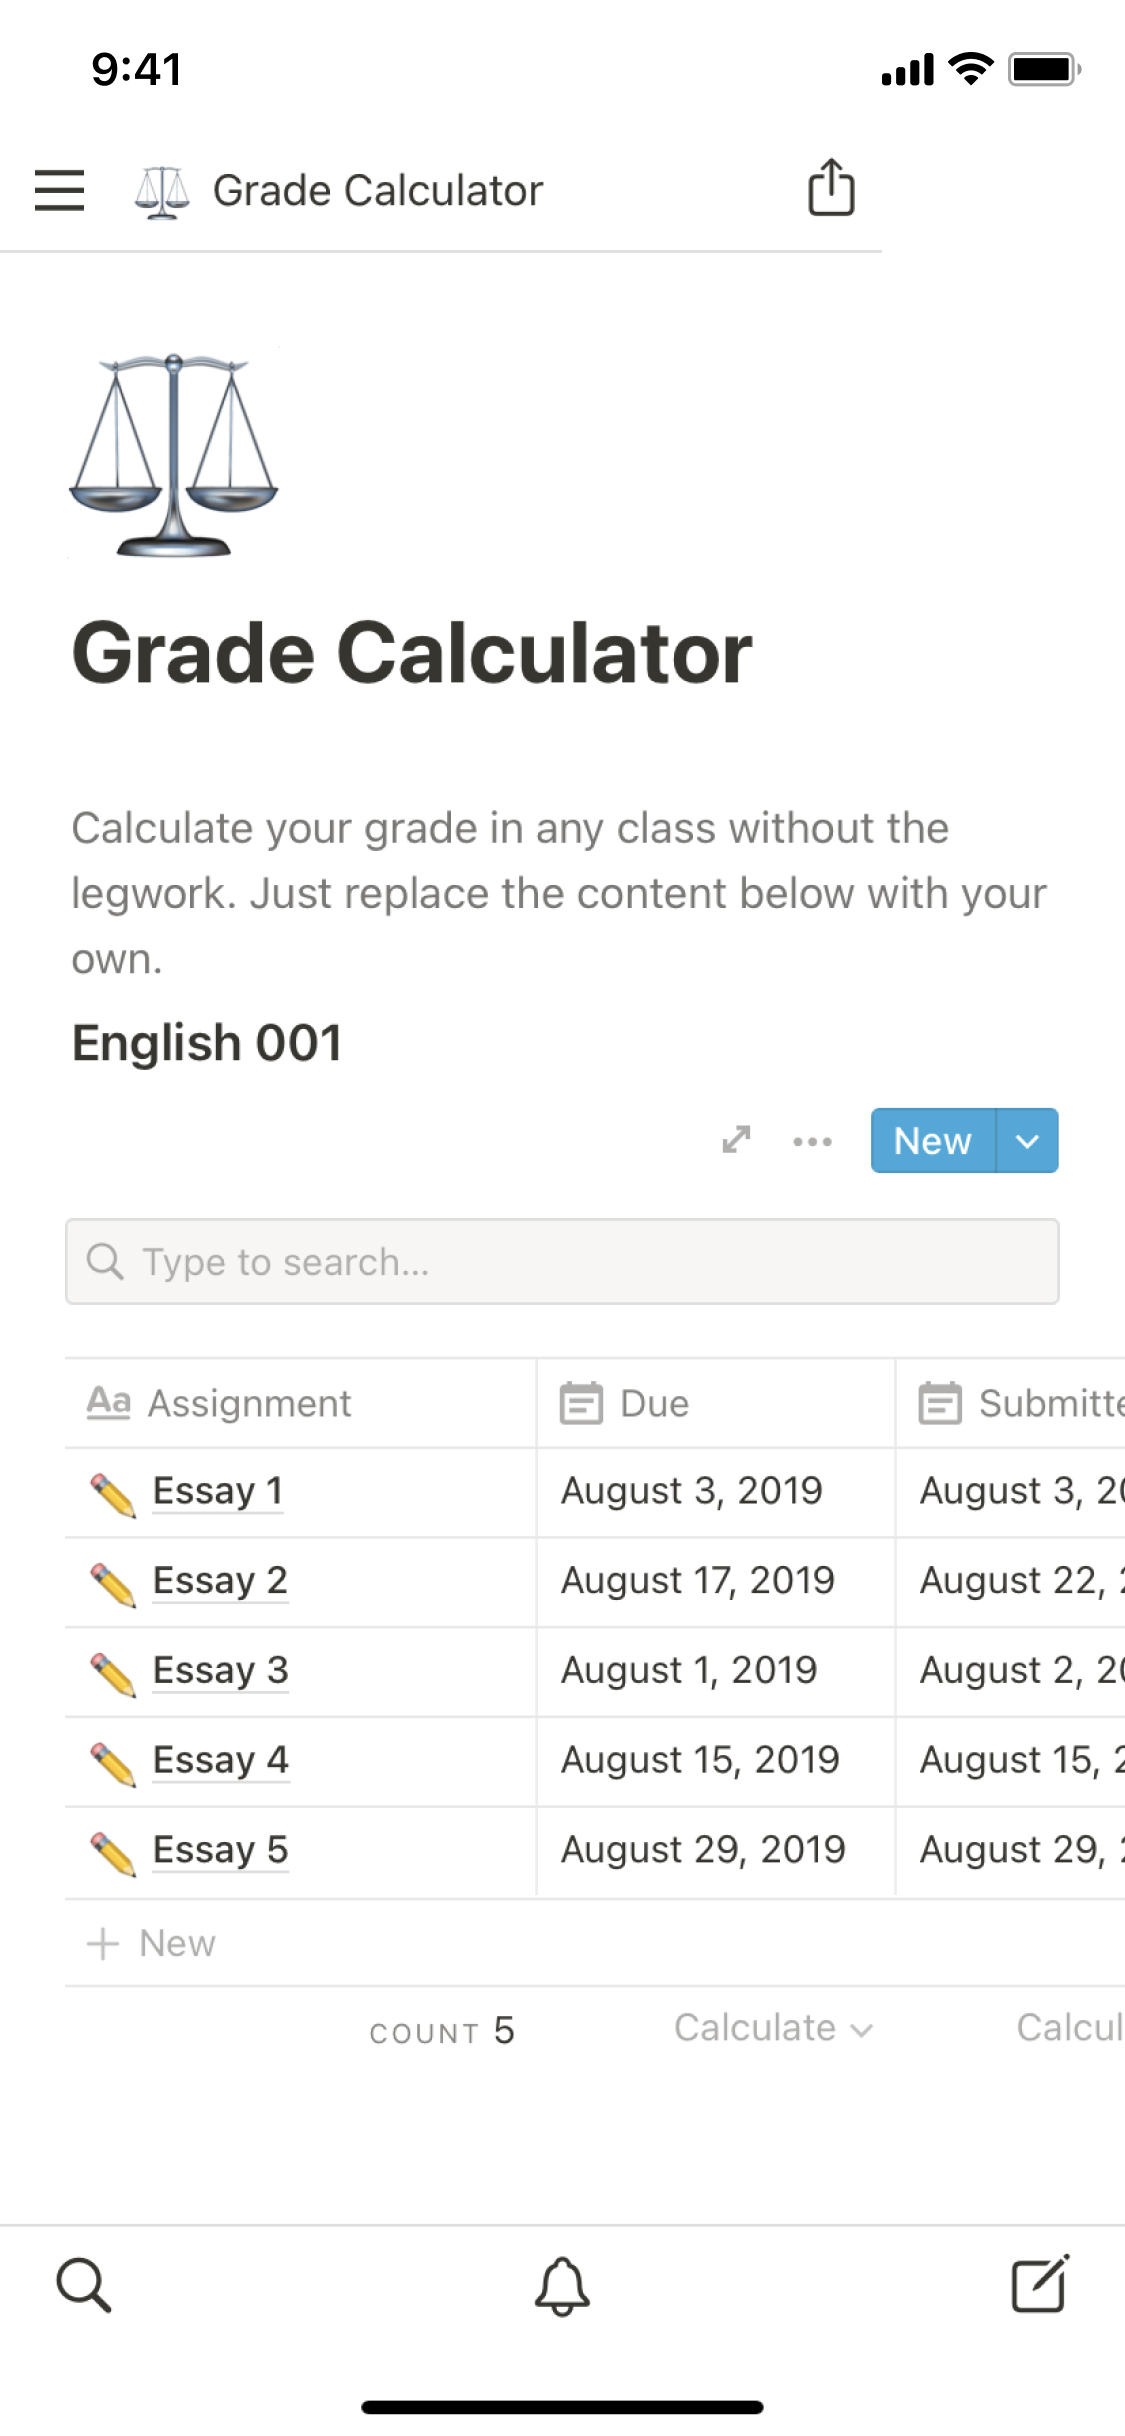 The mobile image for the Grade calculator template